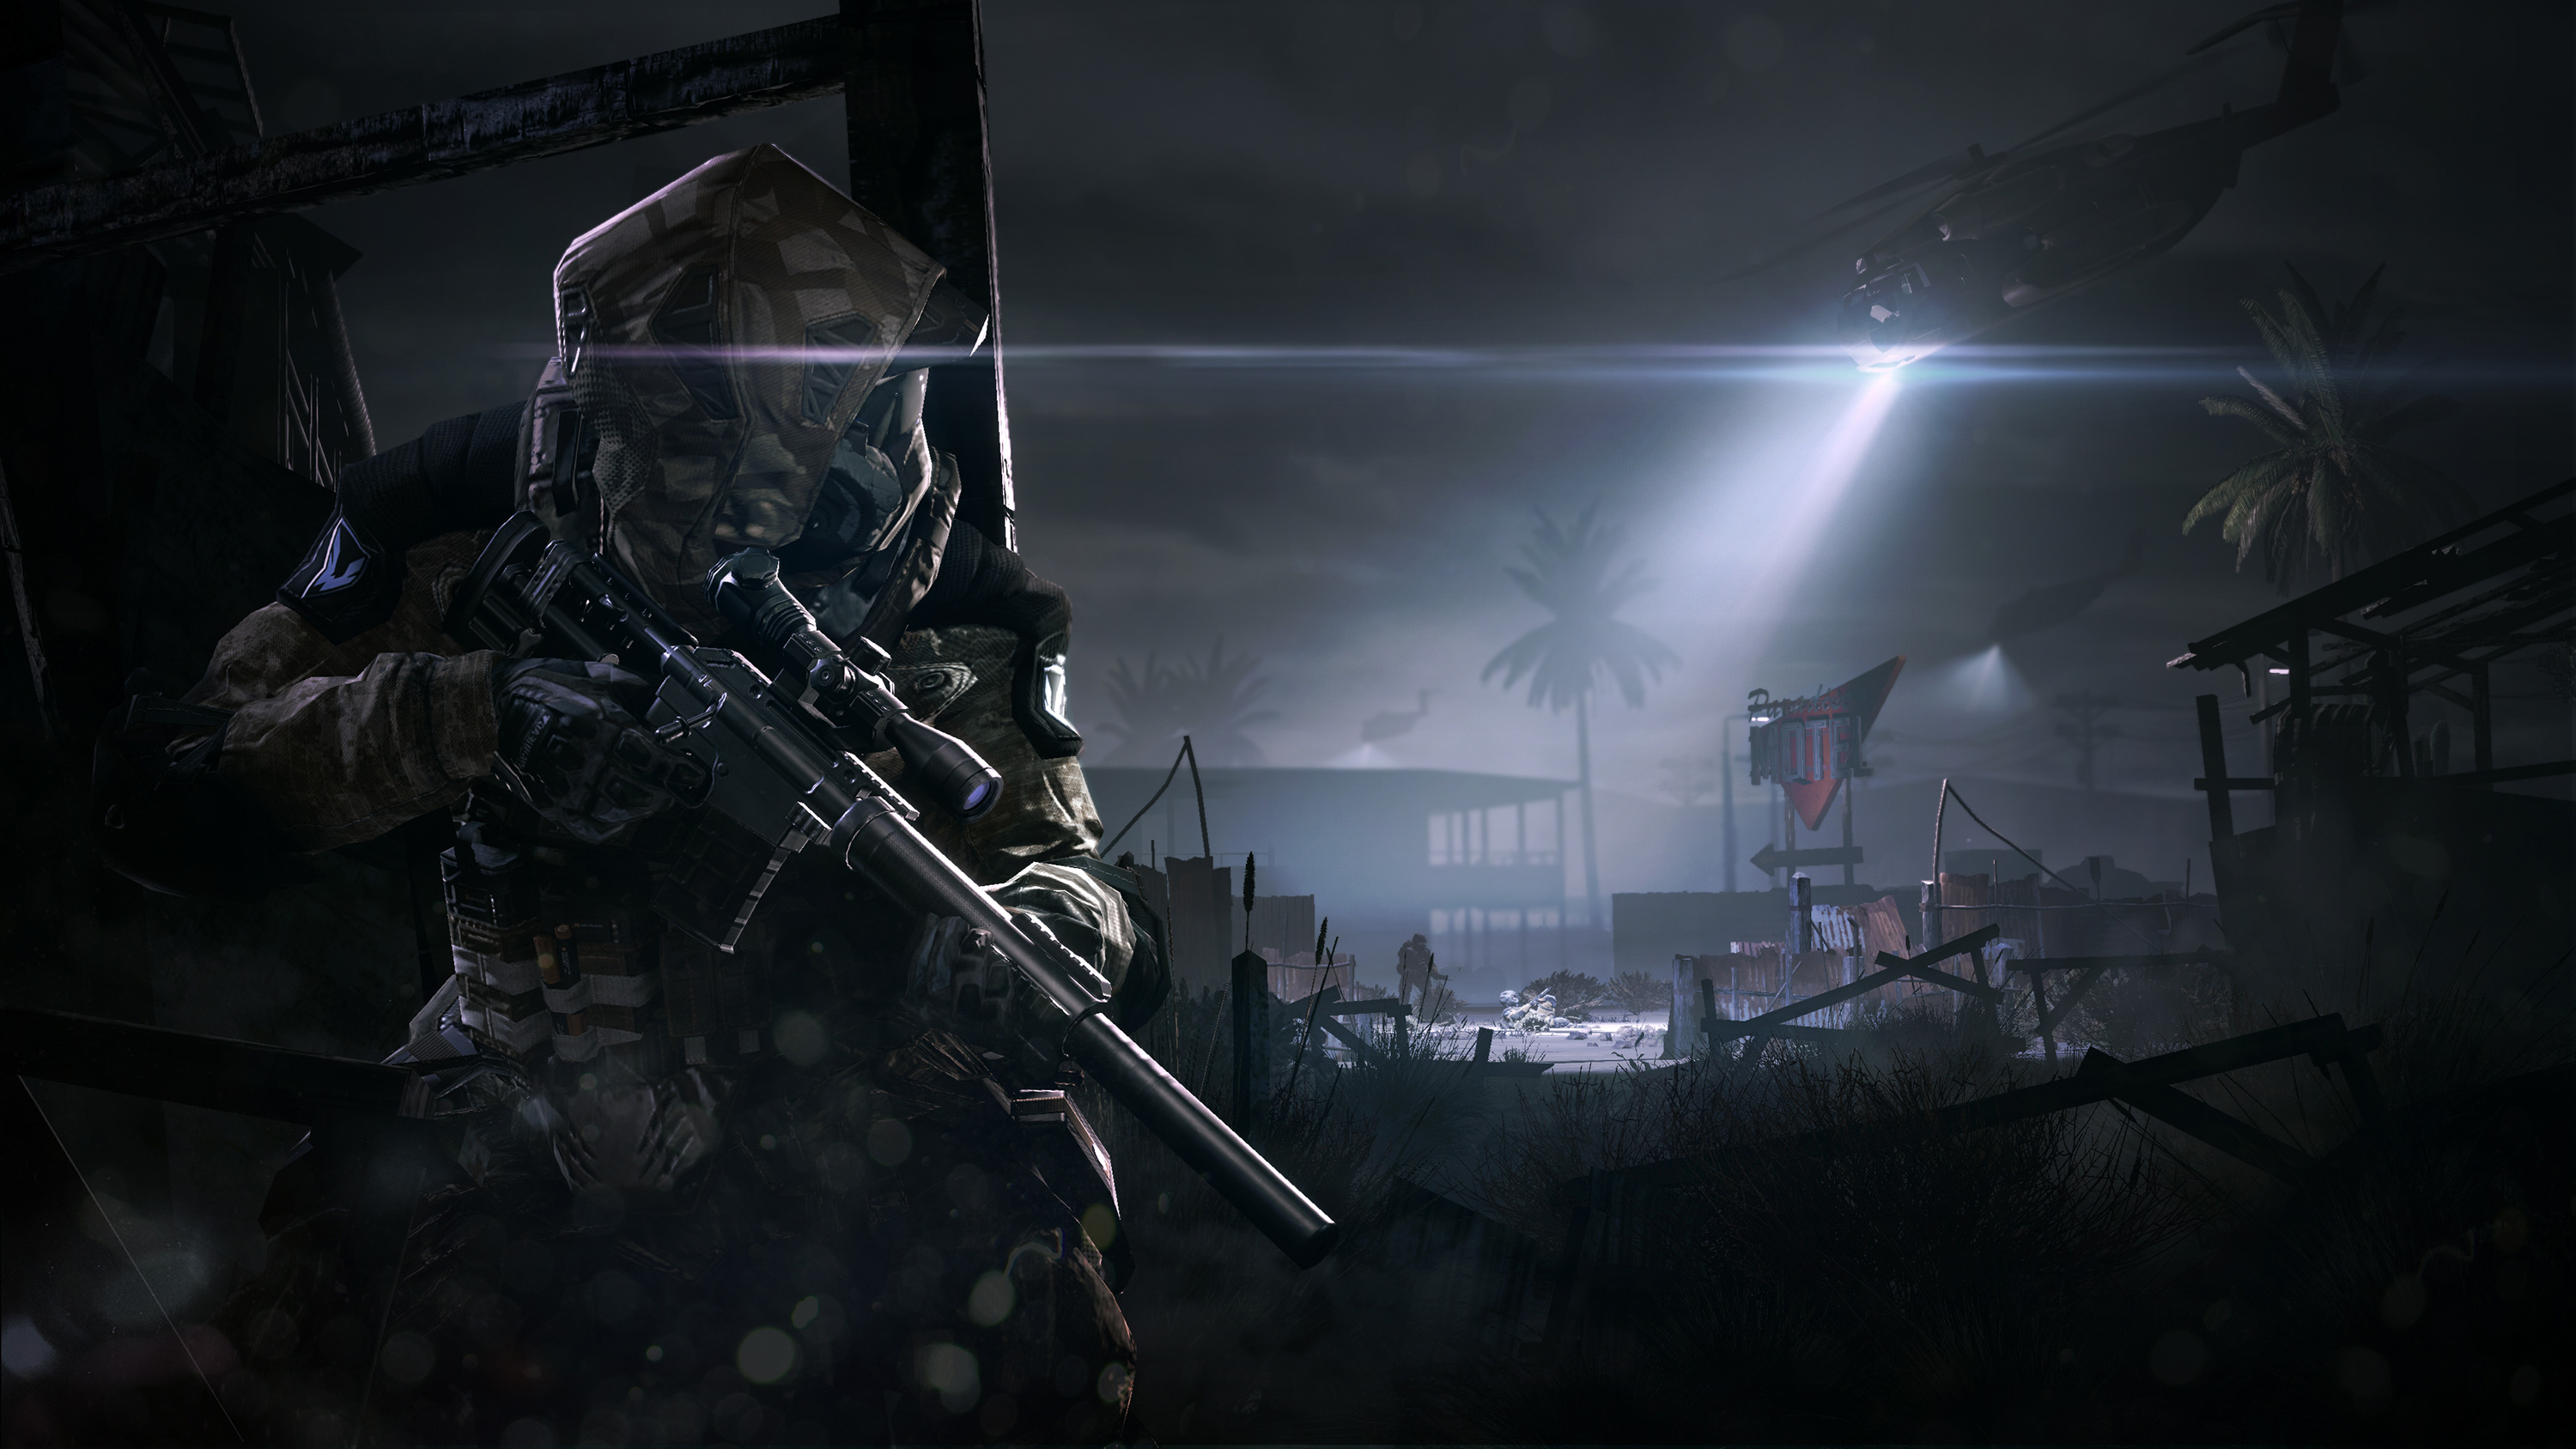 video game, warface, helicopter, night, soldier, weapon